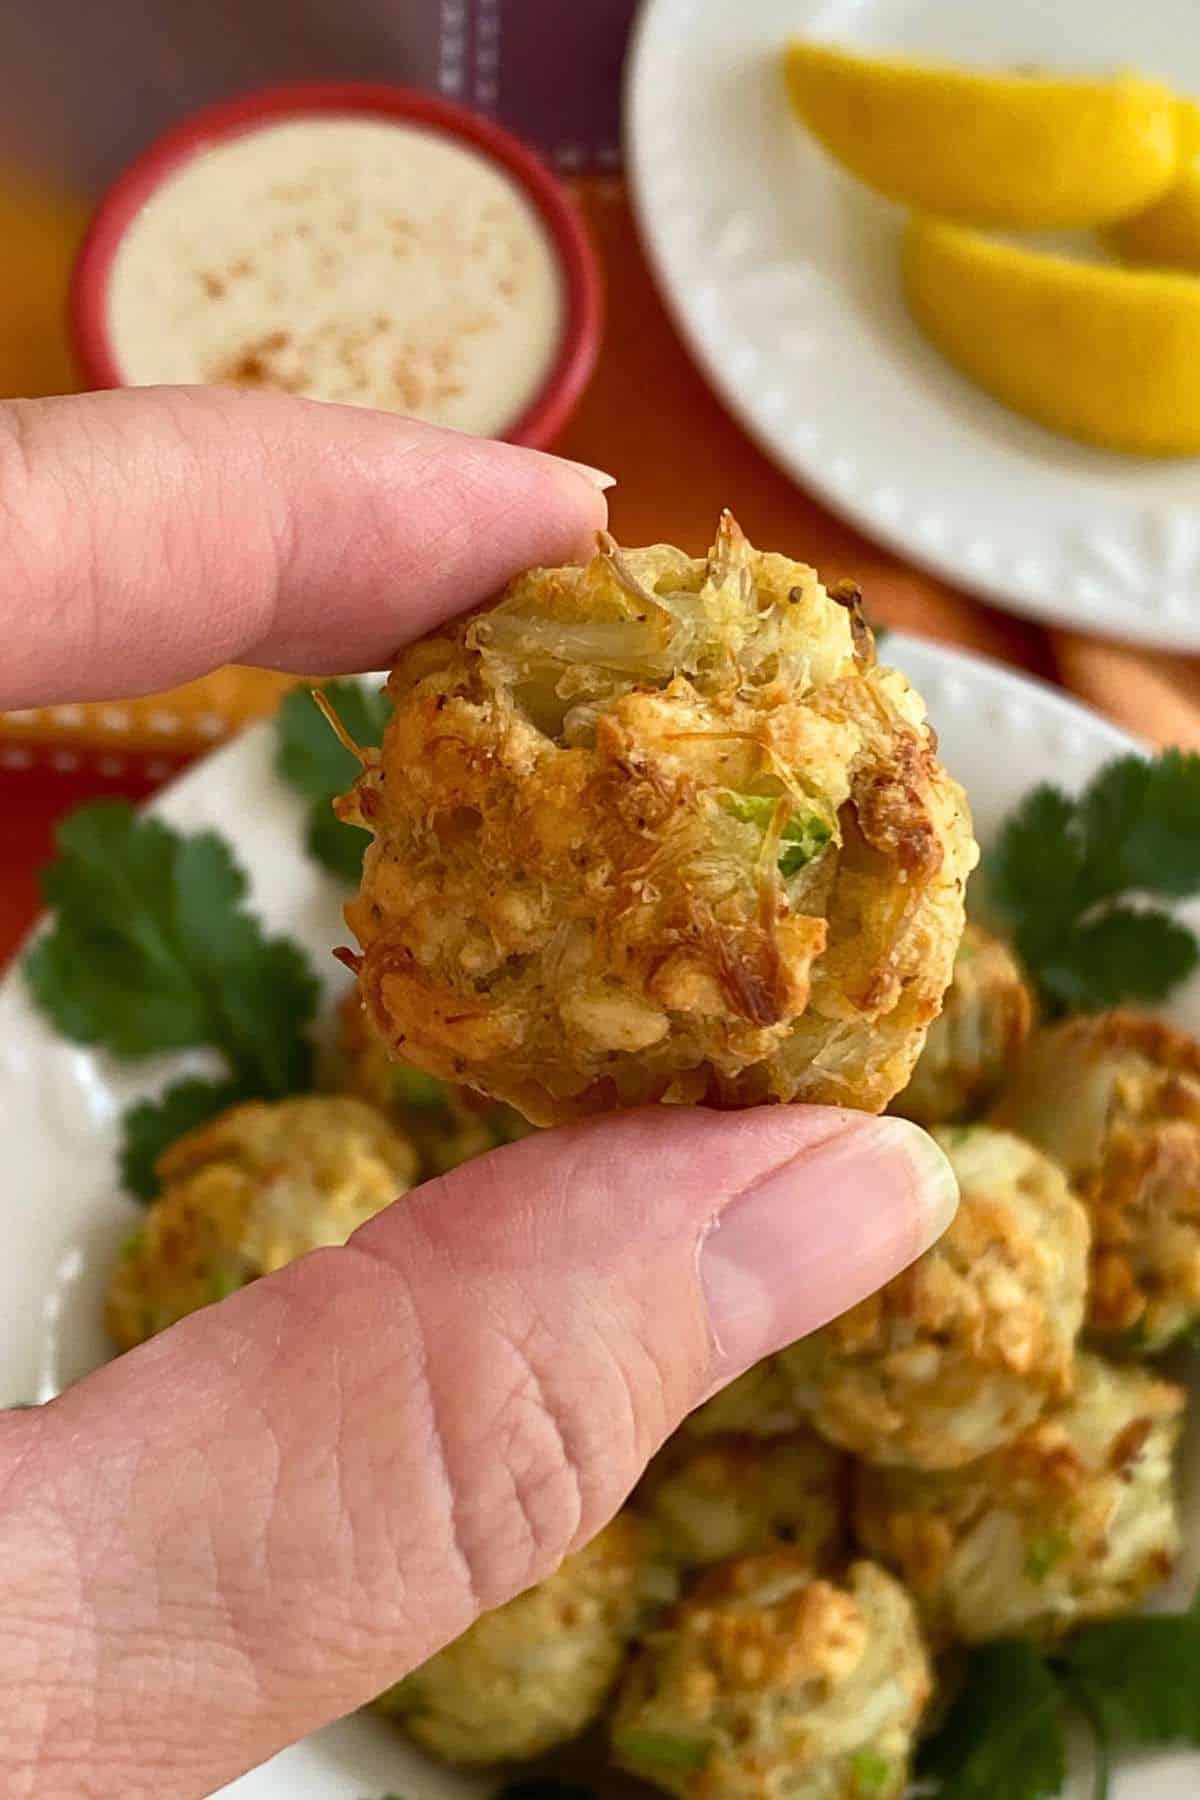 Fingers holding a crab ball appetizer over a bowl with more.